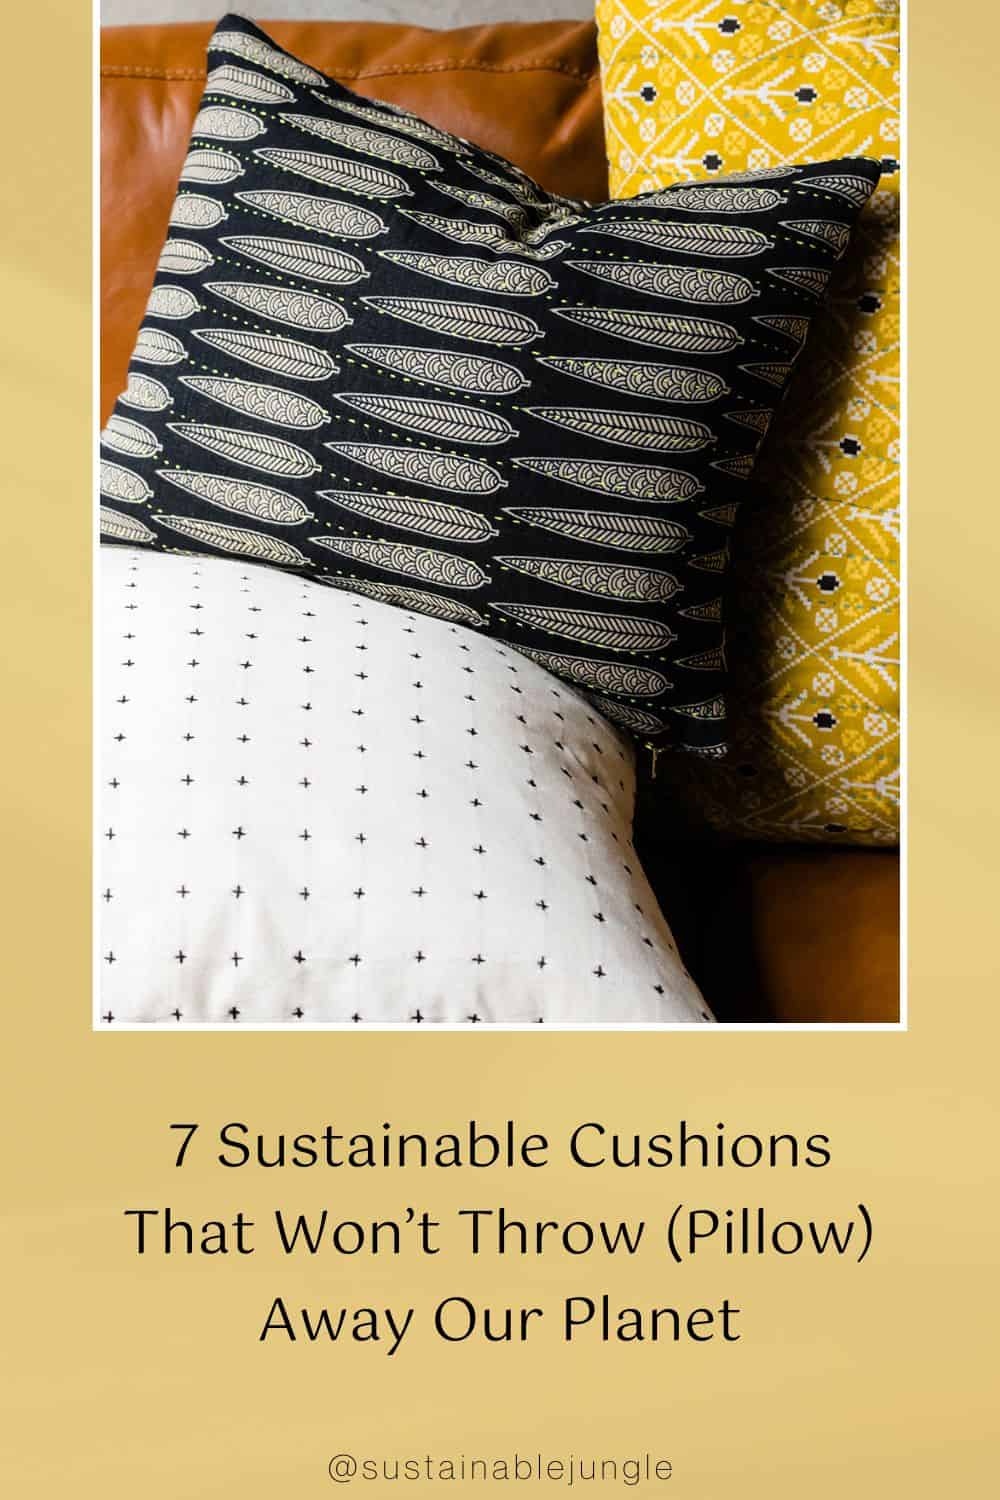 7 Sustainable Cushions That Won’t Throw (Pillow) Away Our Planet Image by Anchal #sustainablecushions #sutainablethrowpillows #ecofriendlycushions #ecofriendlythrowpillows #sustainabledecorativepillows #sustainablejungle